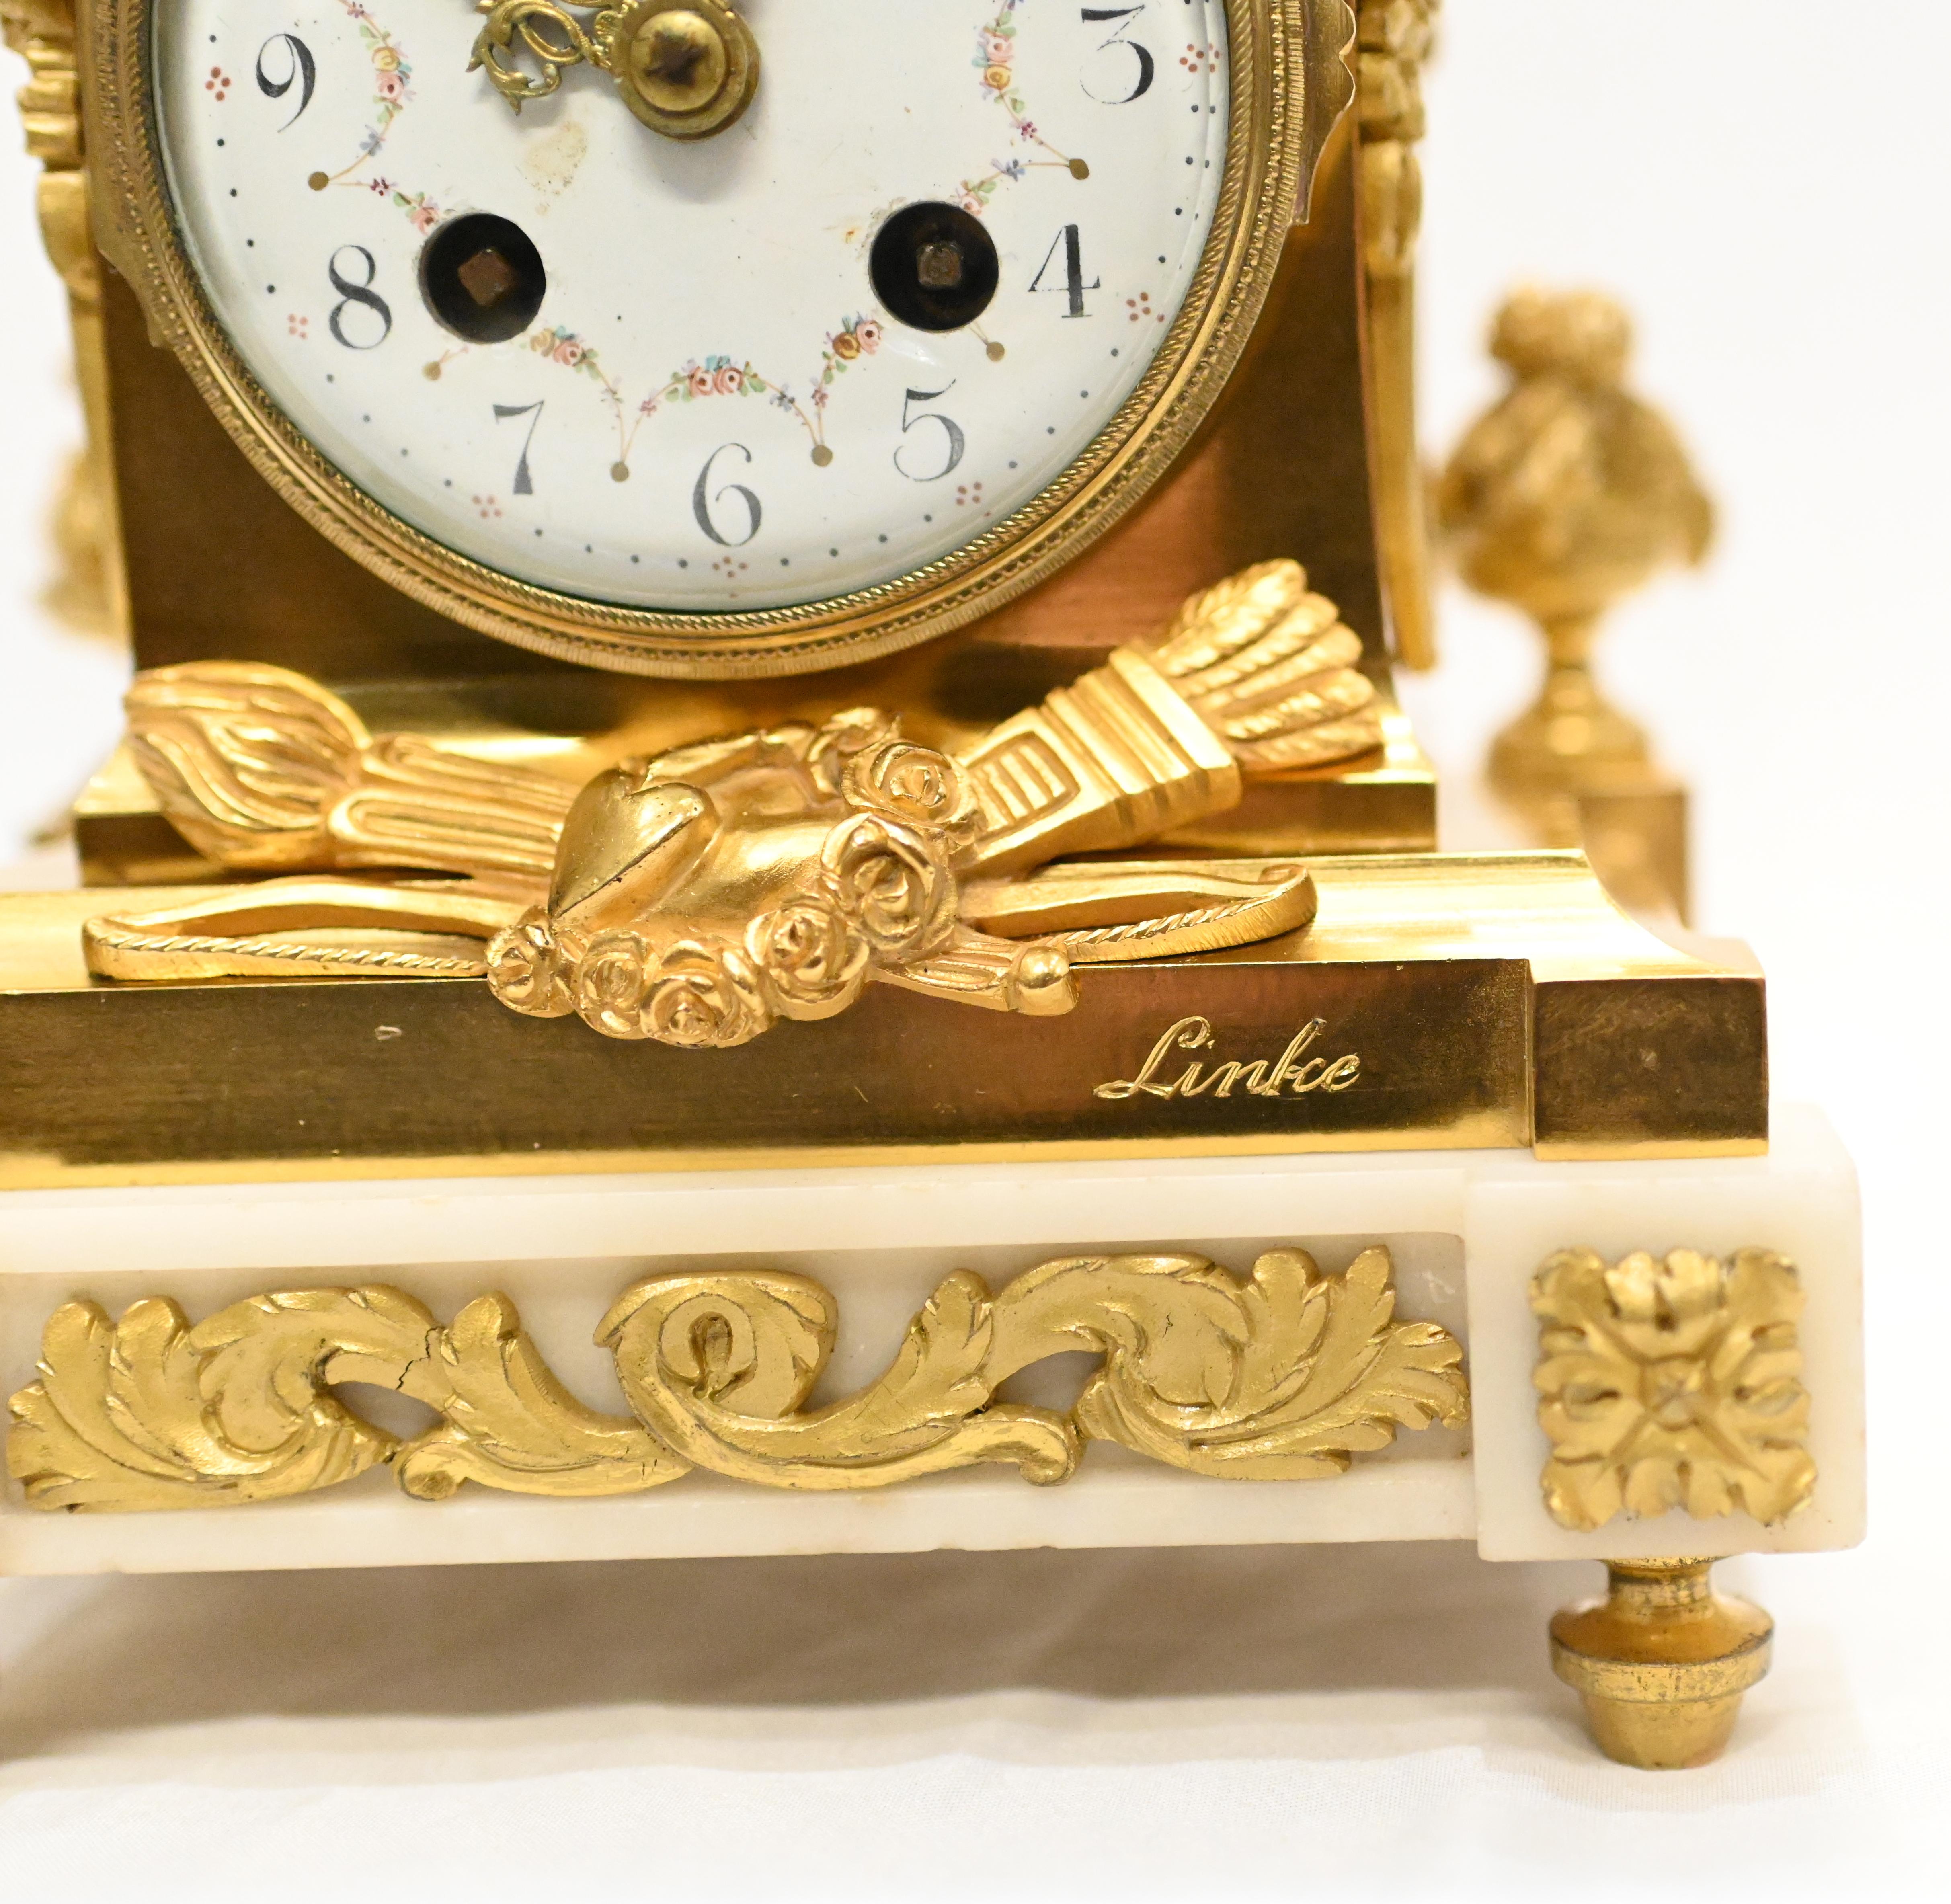 Highly collectable French gilt mantle clock by Francois Linke
Piece is signed on the base, please see close up photo
The casting and intricacy to the gilt is incredibly detailed
Classic motifs, acathus scrolls, rosettes, mini urns and of course the